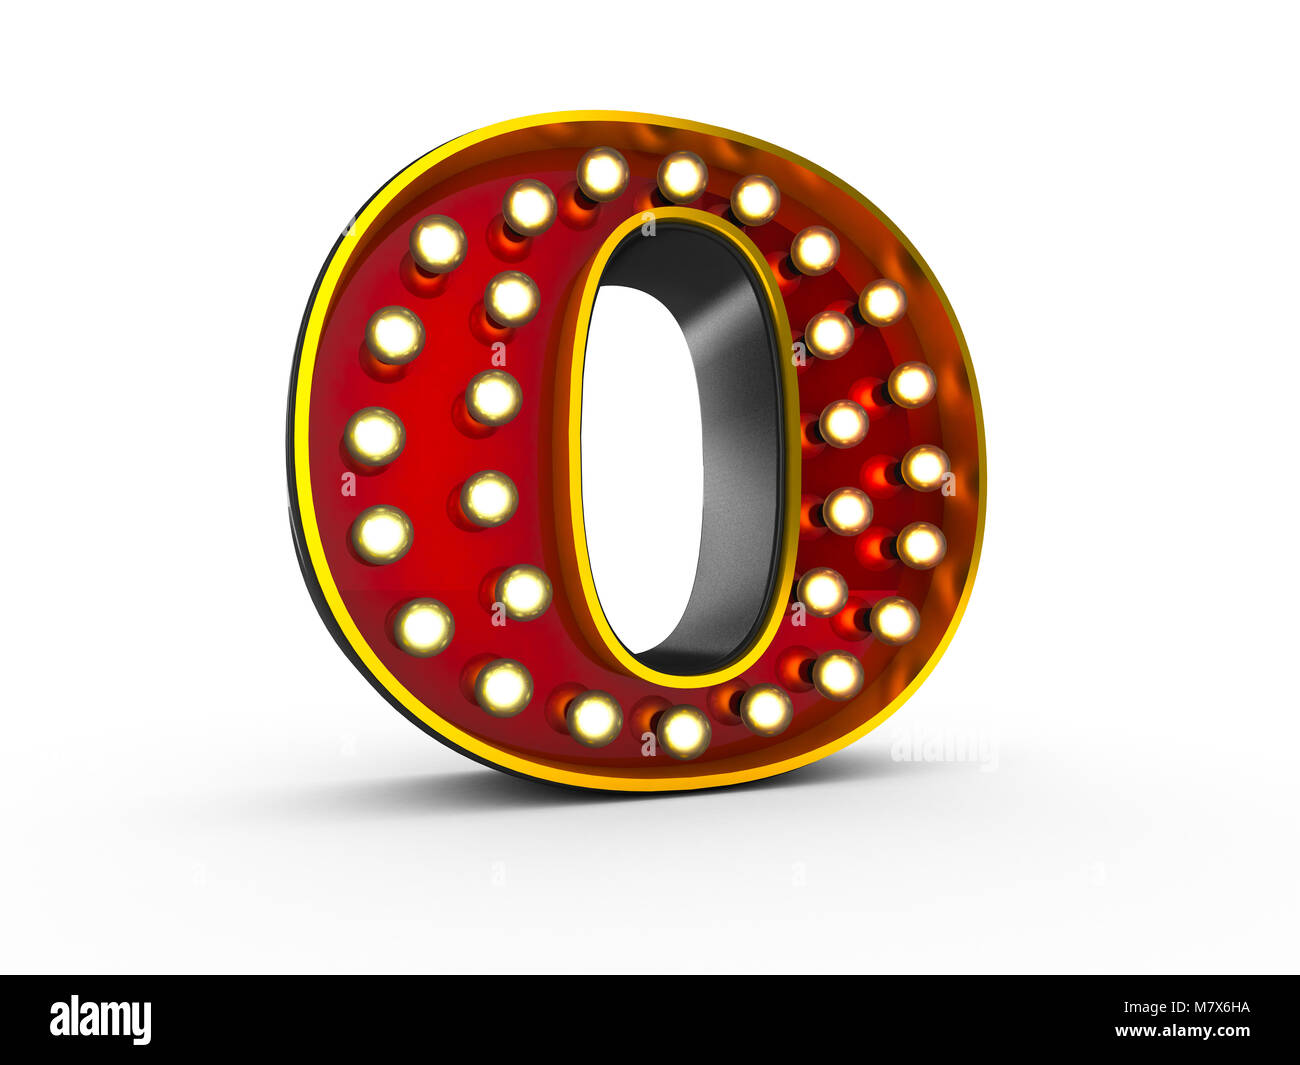 High quality 3D illustration of the letter O in Broadway style with light bulbs illuminating it over white background Stock Photo